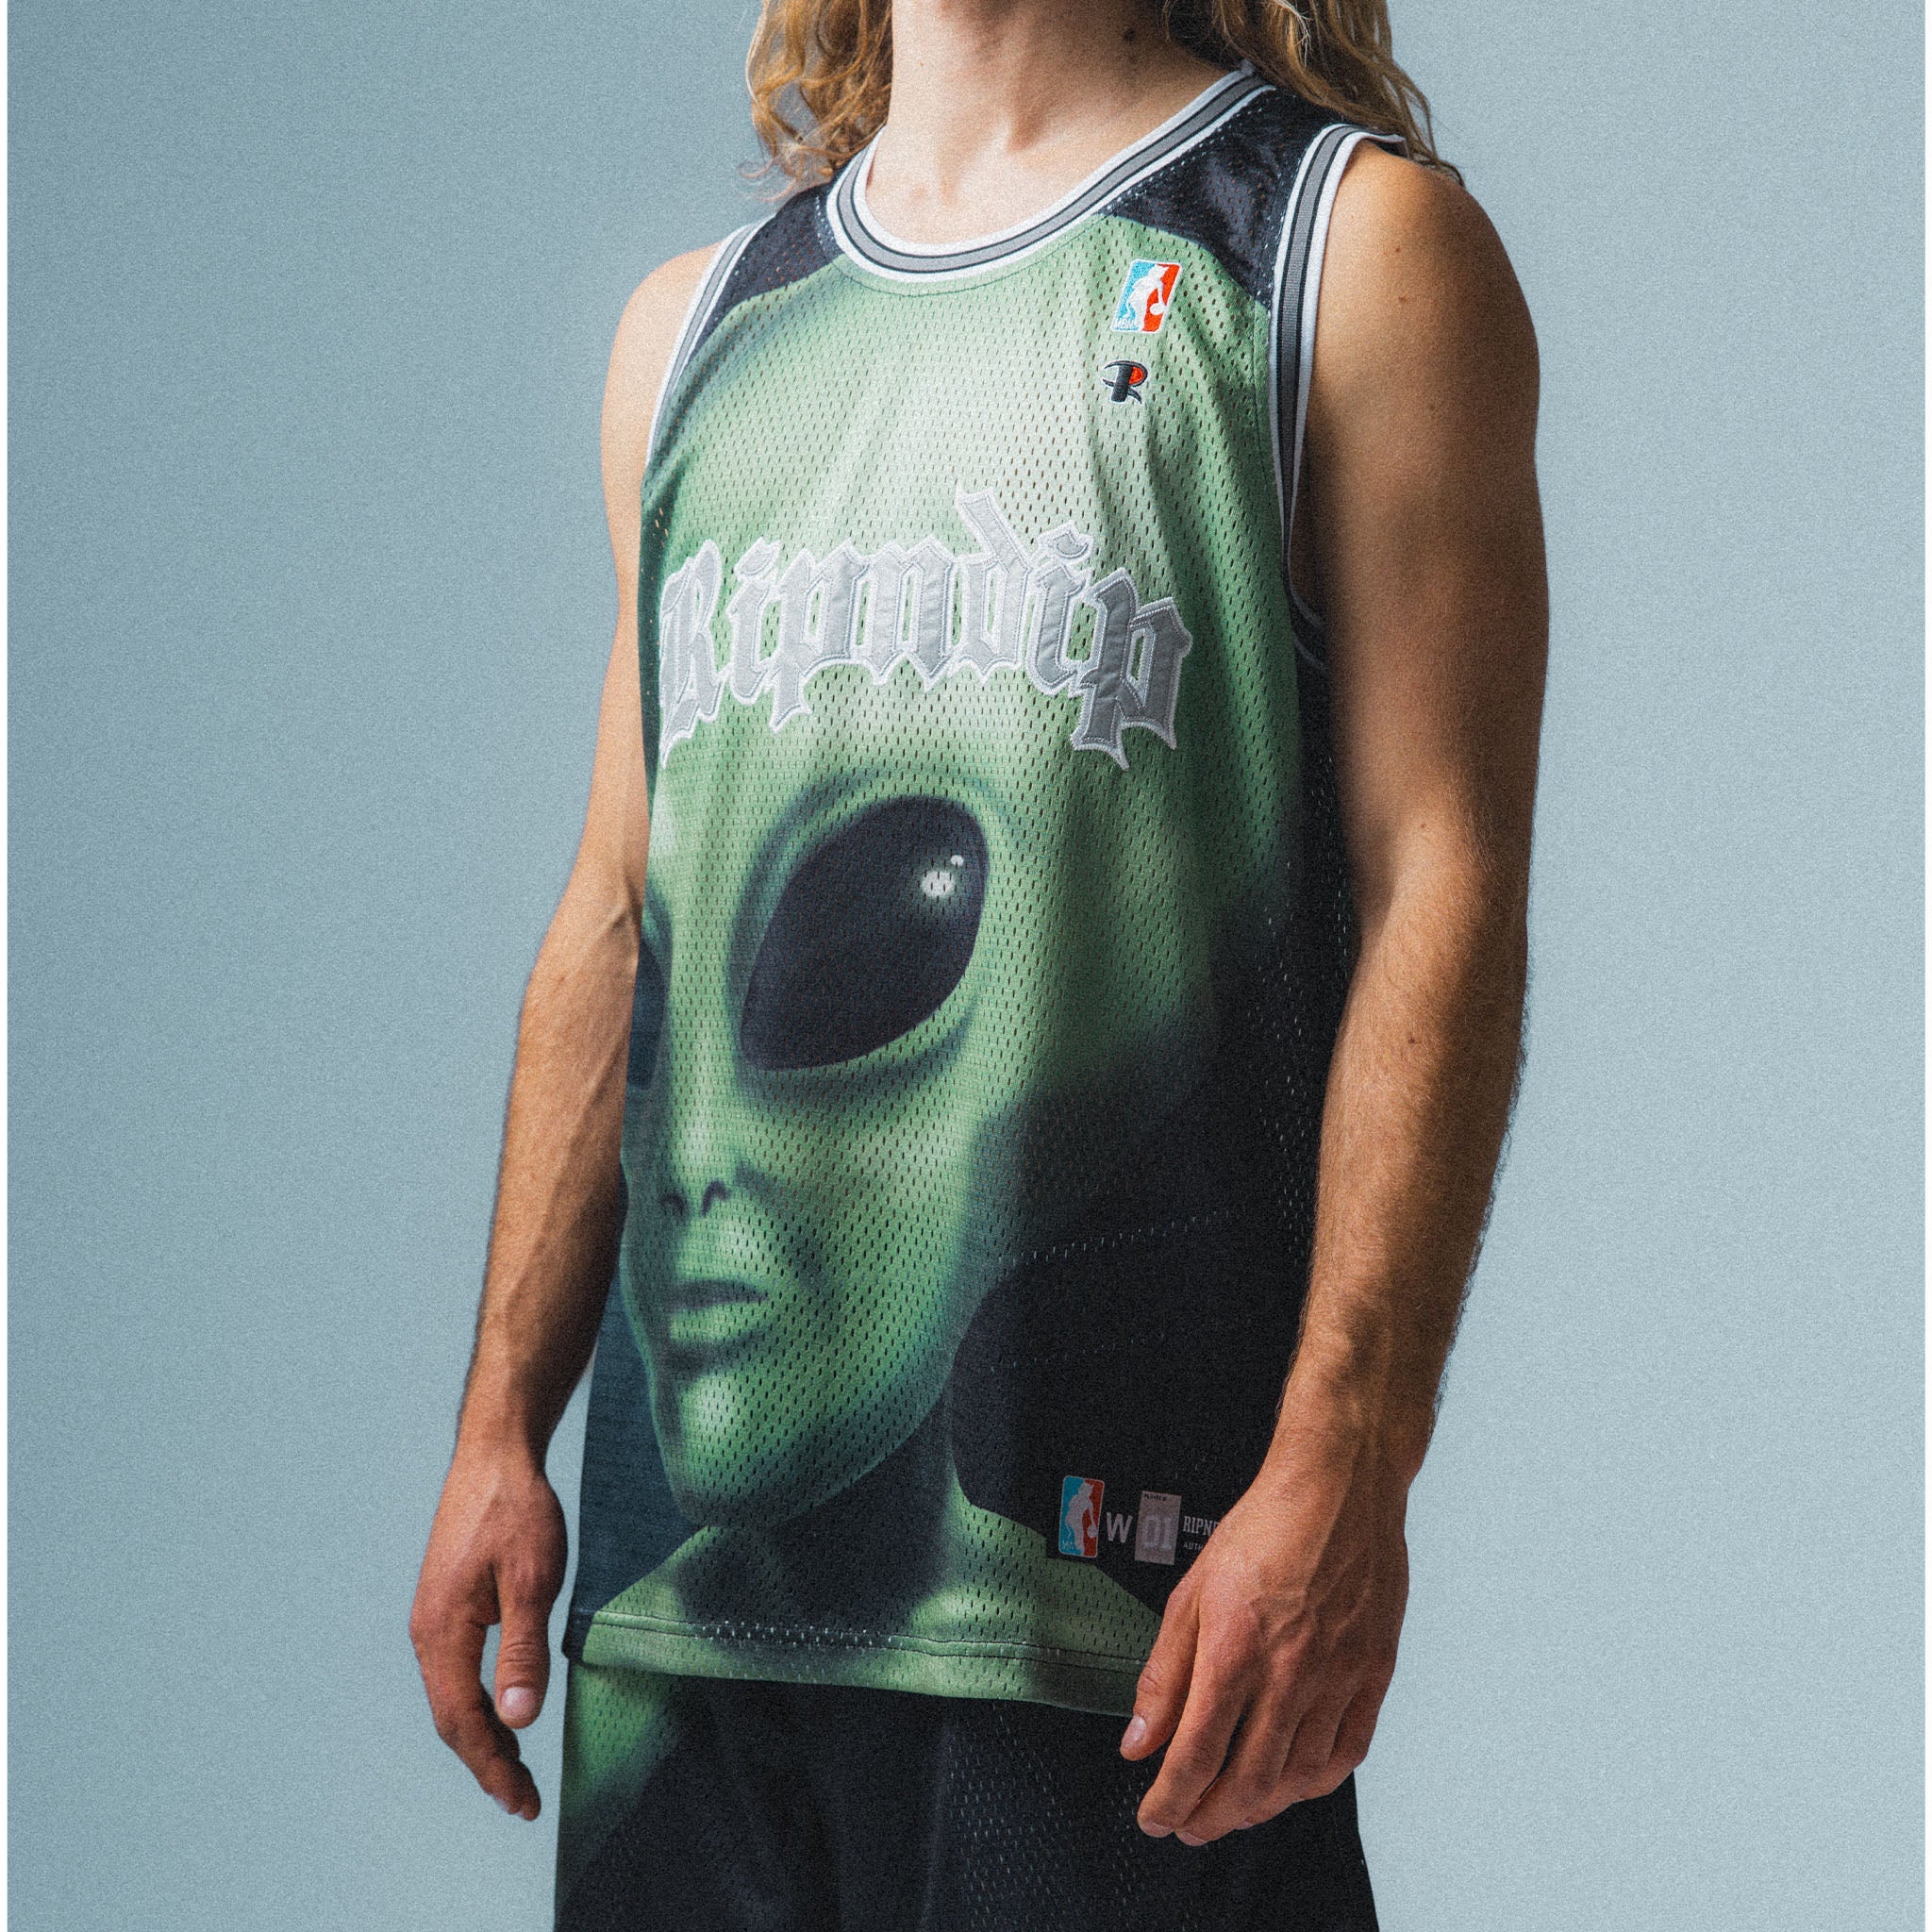 RIPNDIP We Come In Peace Basketball Jersey (Black)